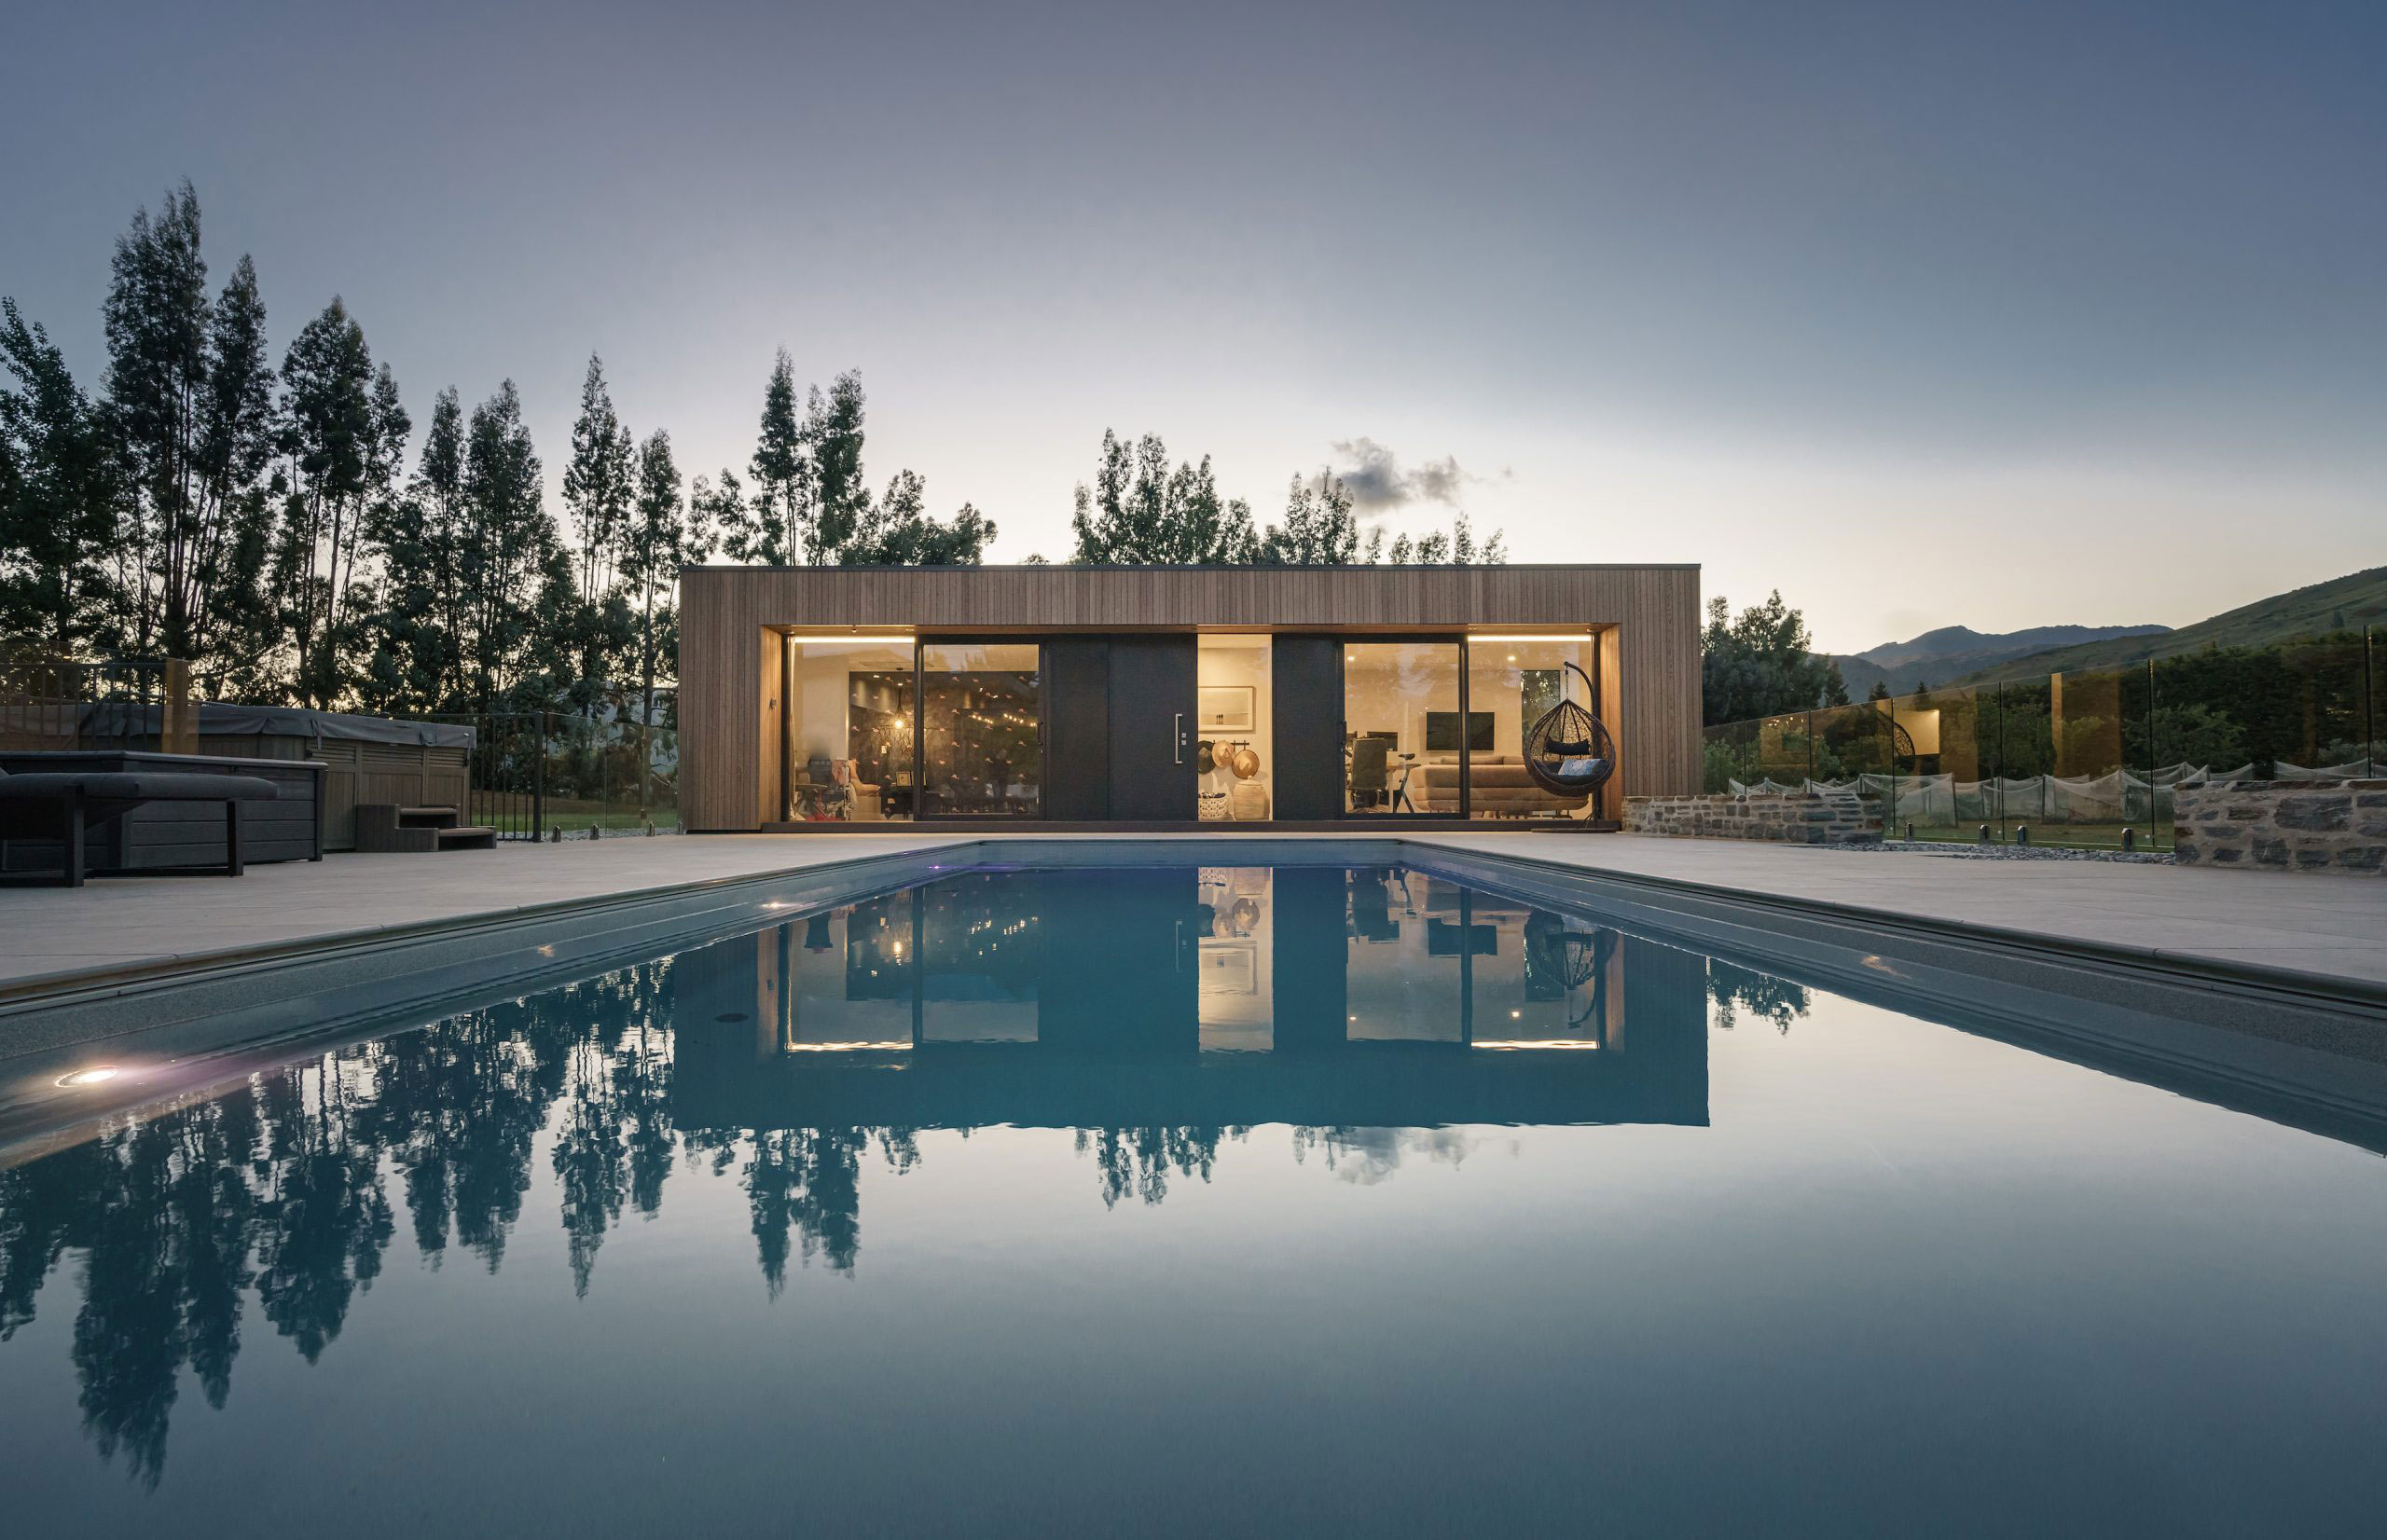 Previous Project: Shotover Pool House